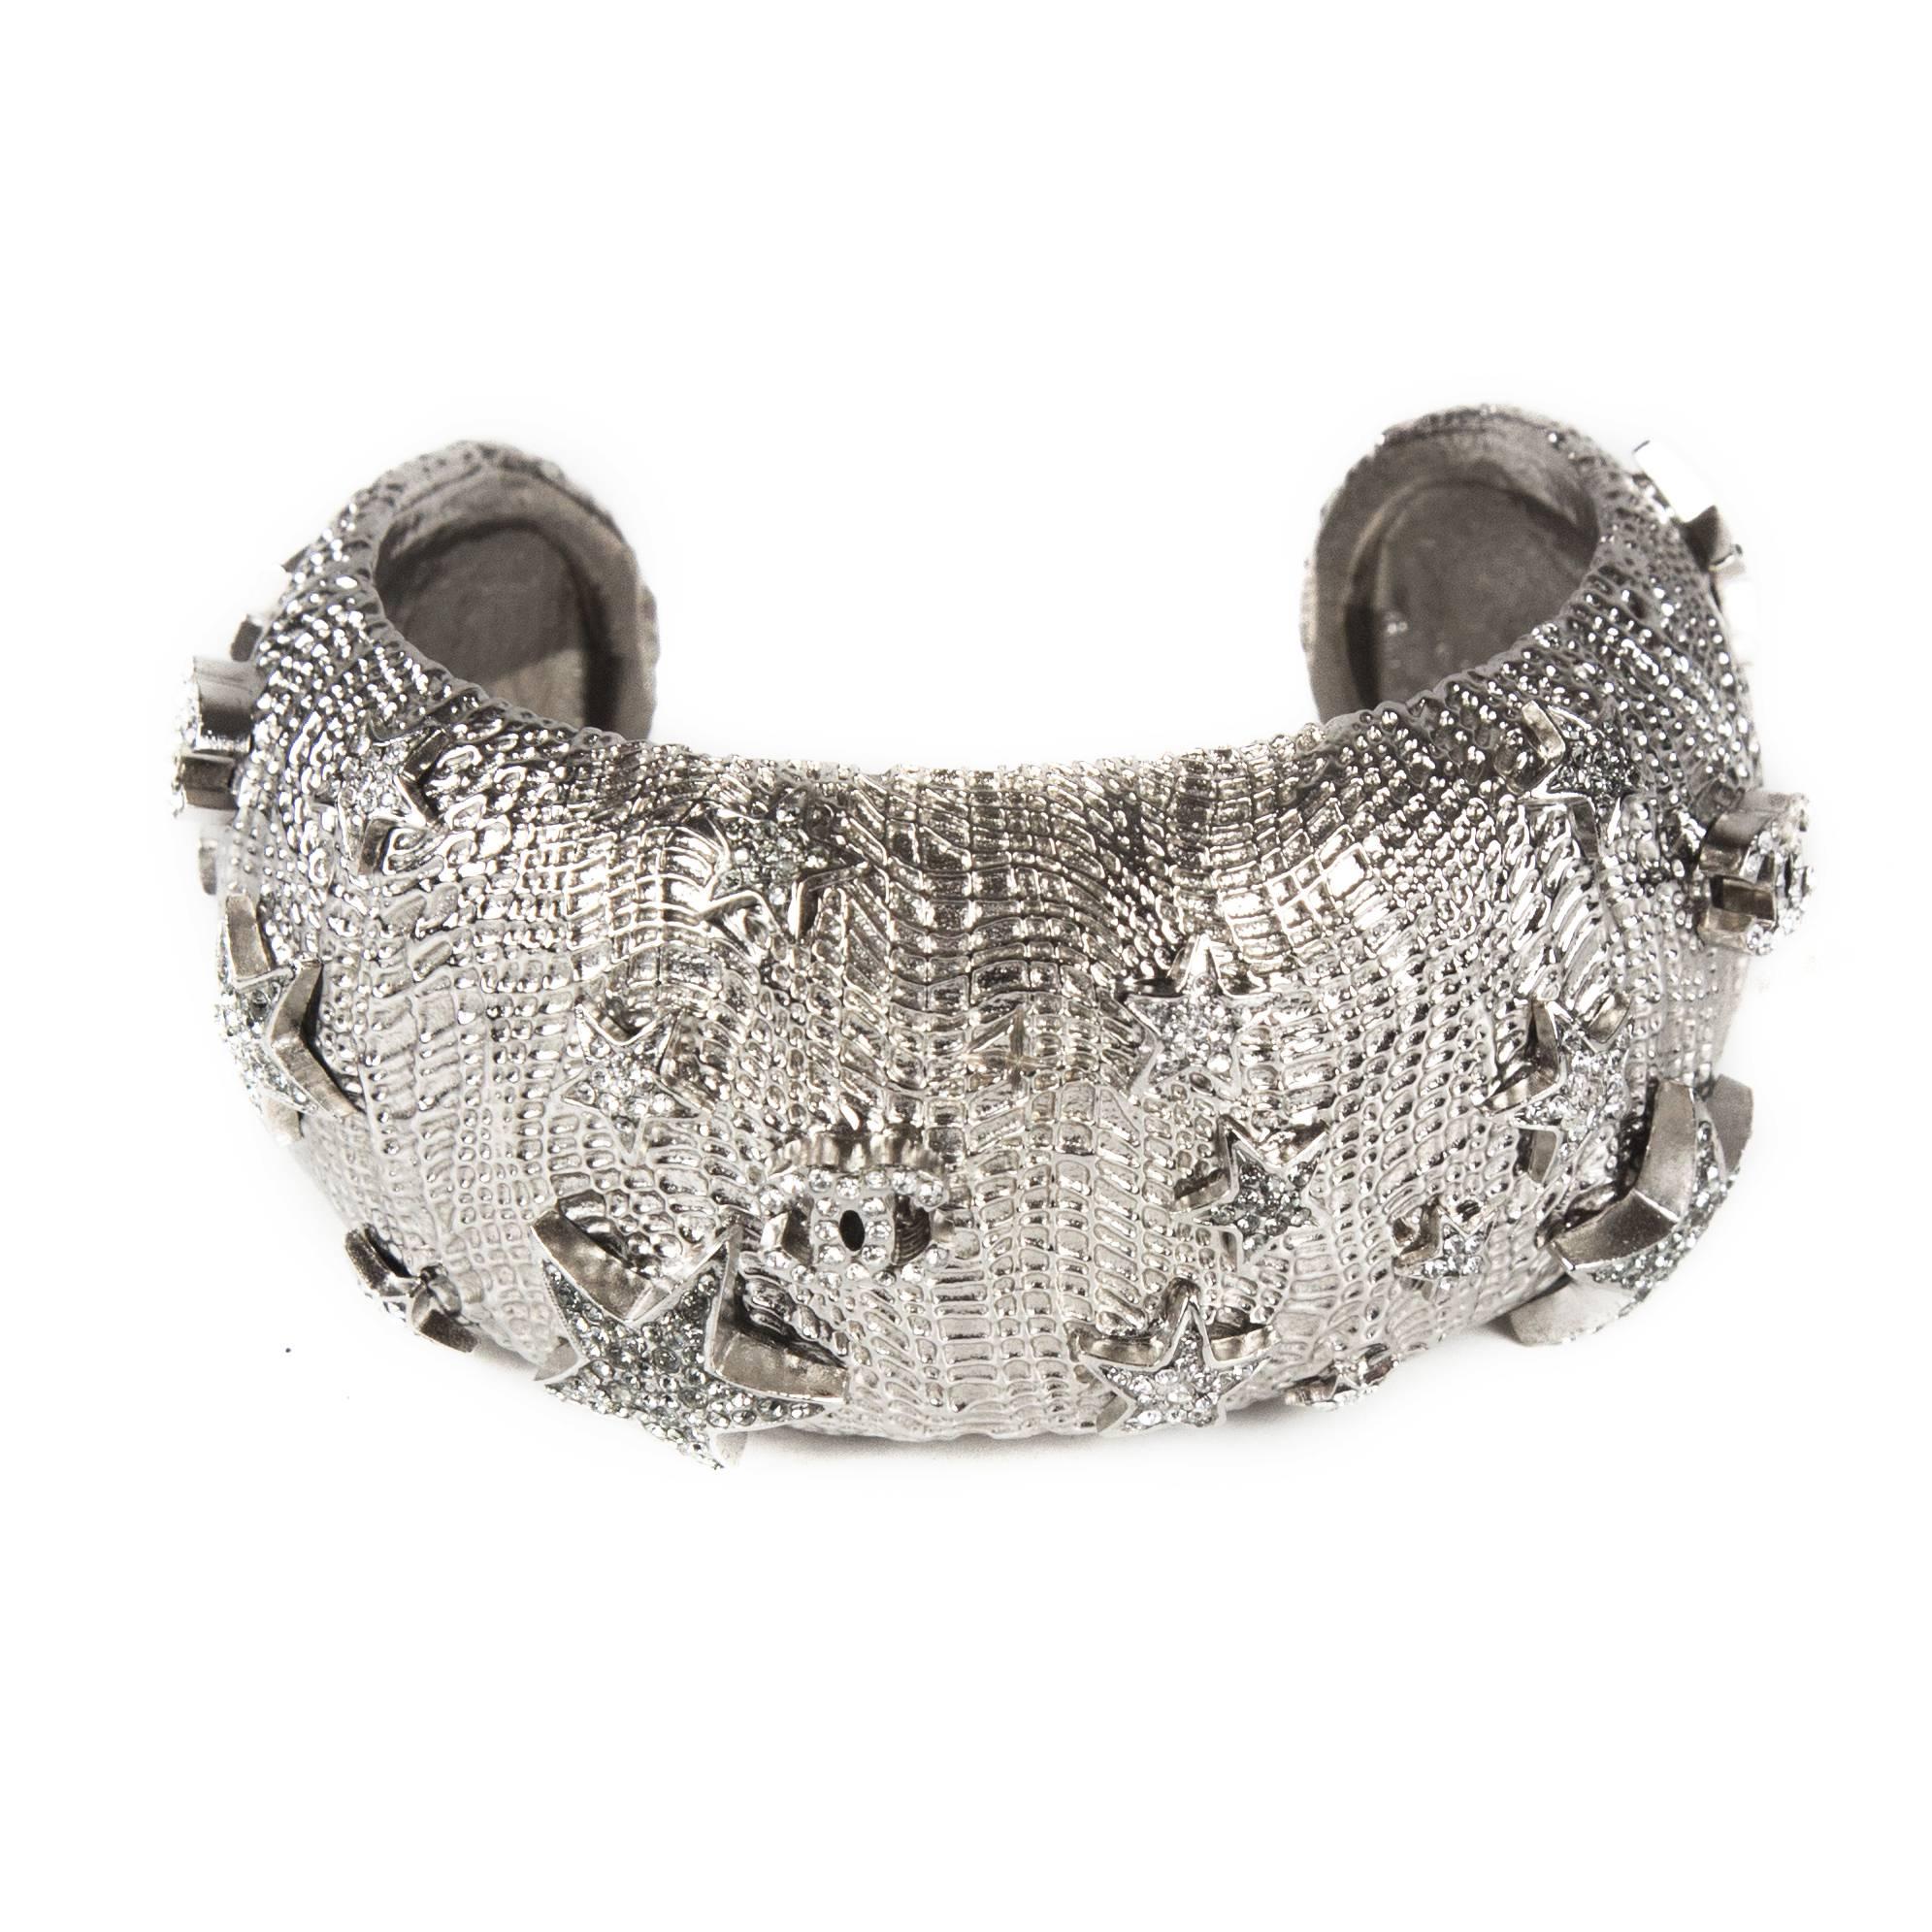 Chanel - Star Cuff Wide Bracelet

Color: Silver

Material: Metal

------------------------------------------------------------
 
Details:

- silver tone hardware

- crystal embellishments throughout

- cc logos & stars throughout

-